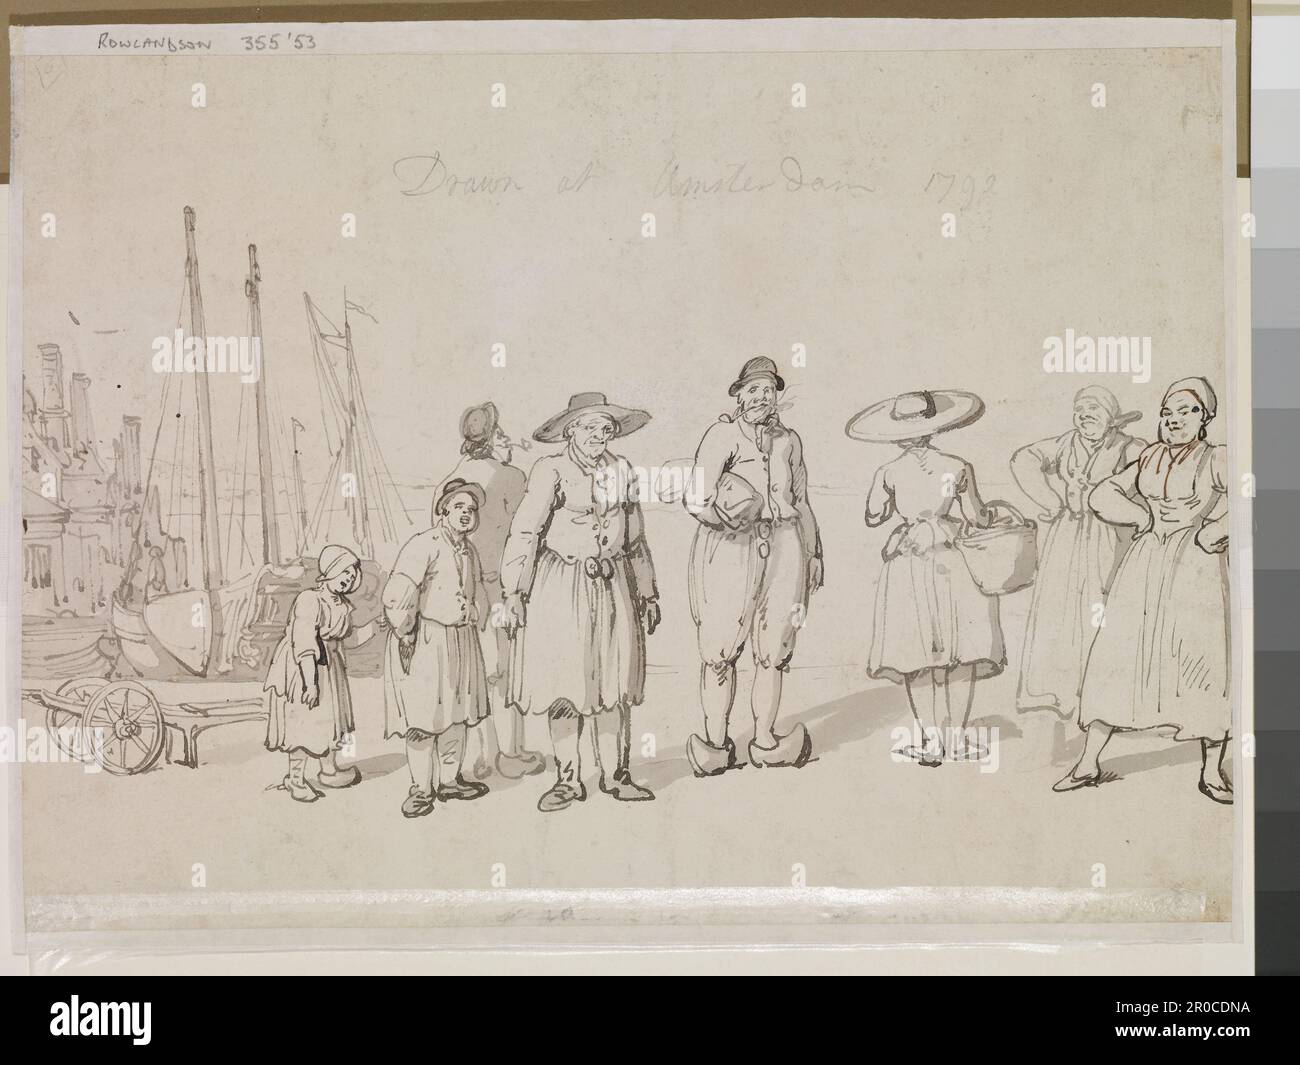 Verso. Sketch of Dutch fisherfolk, Amsterdam, 1792. Thomas Rowlandson.  On verso: Sketch of Dutch fisherfolk and inscribed by the artist, 'Drawn at Amsterdam 1792'. Recto: Pier at Amsterdam. Stock Photo